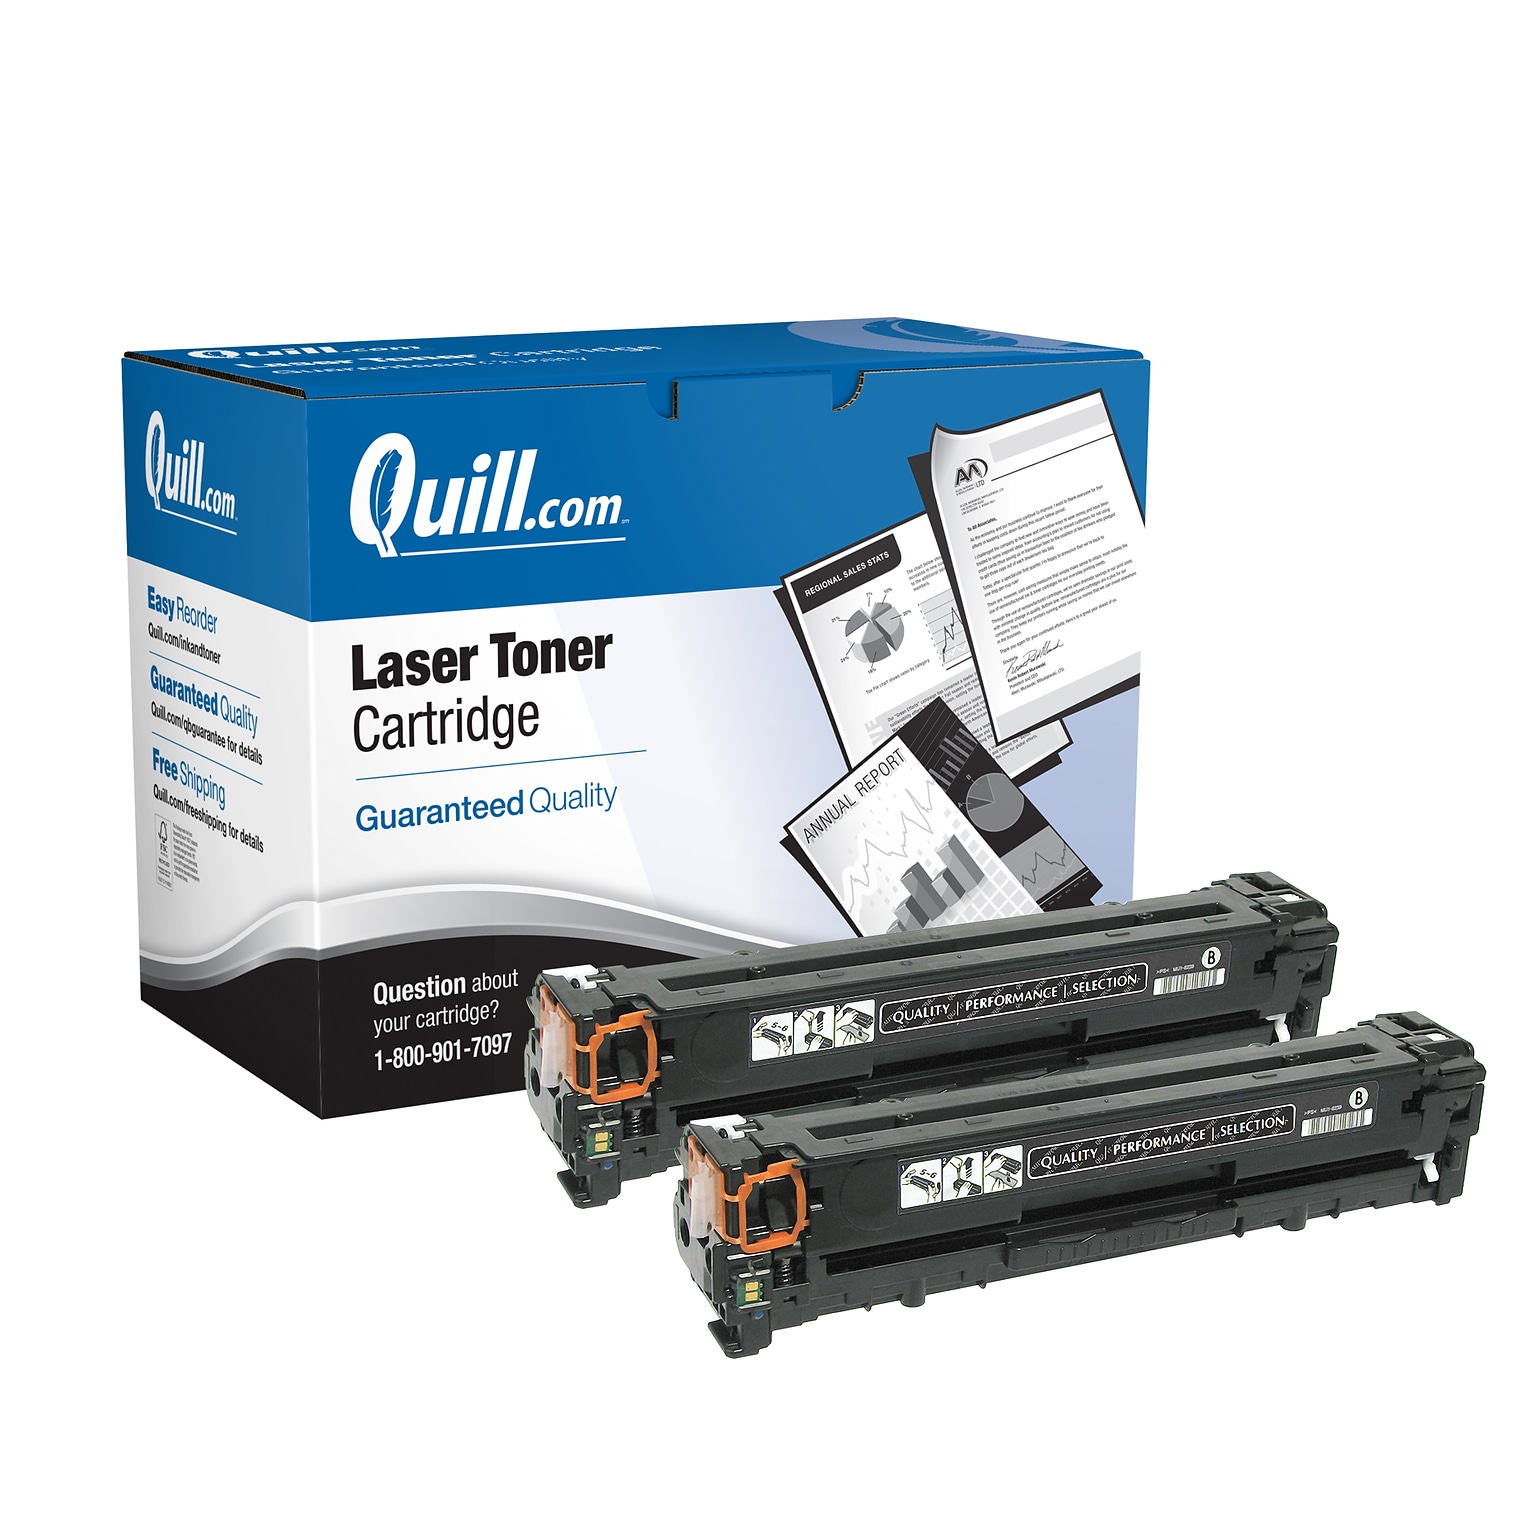 Quill Brand® Remanufactured Black Standard Yield Toner Cartridge Replacement for HP 125A (CB540A), 2/Pack (Lifetime Warranty)